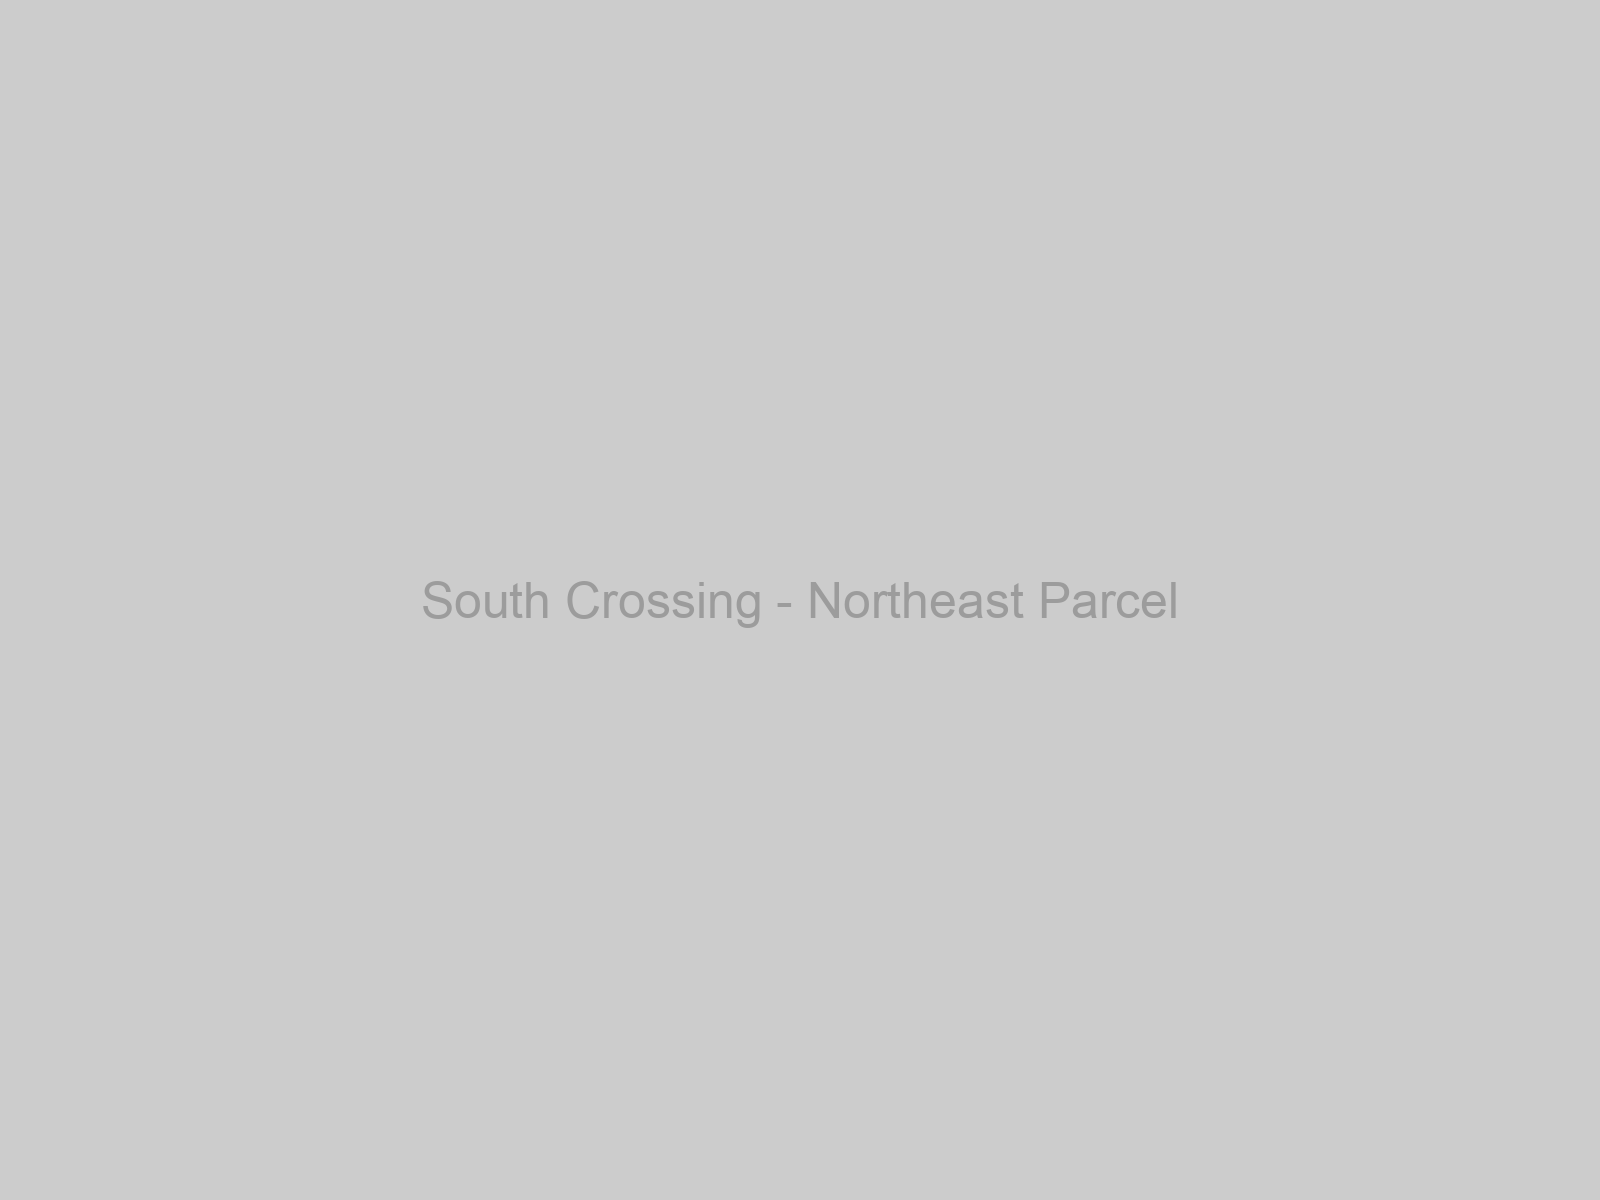 South Crossing - Northeast Parcel